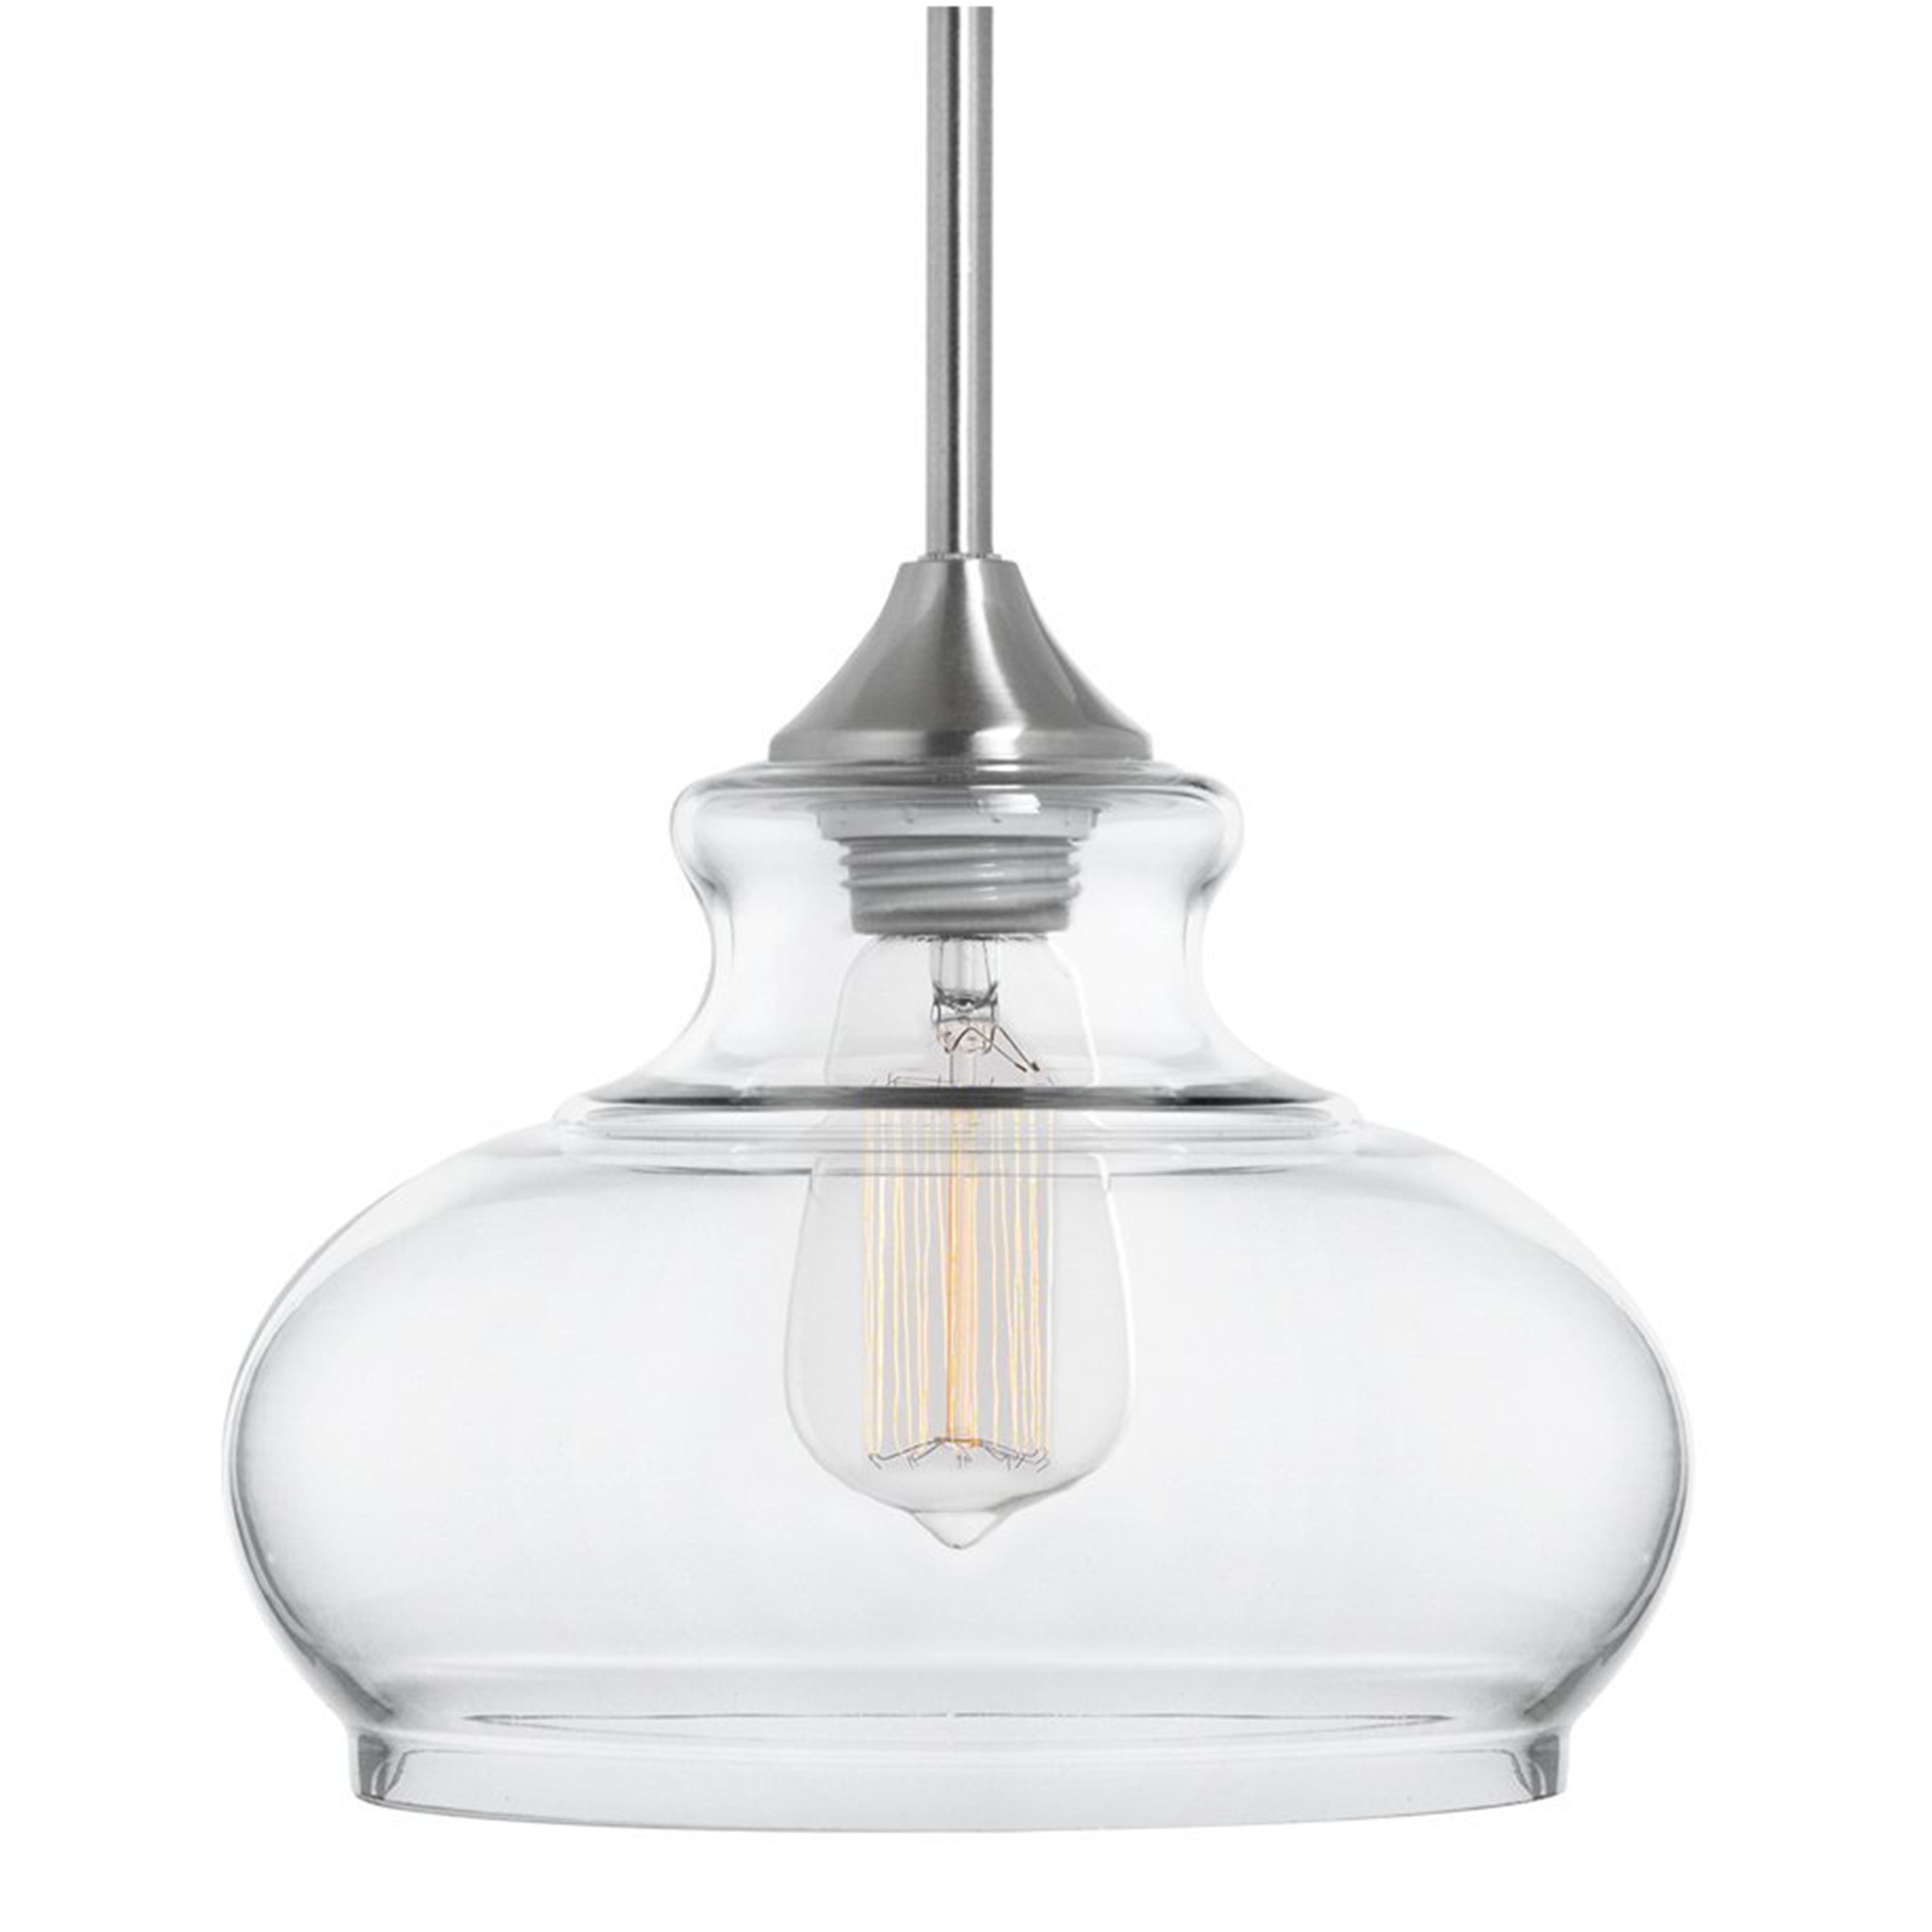 Ariella Ovale LED Modern Residential Lighting Linea | Pendant Affordable Lighting included | and bulb Light